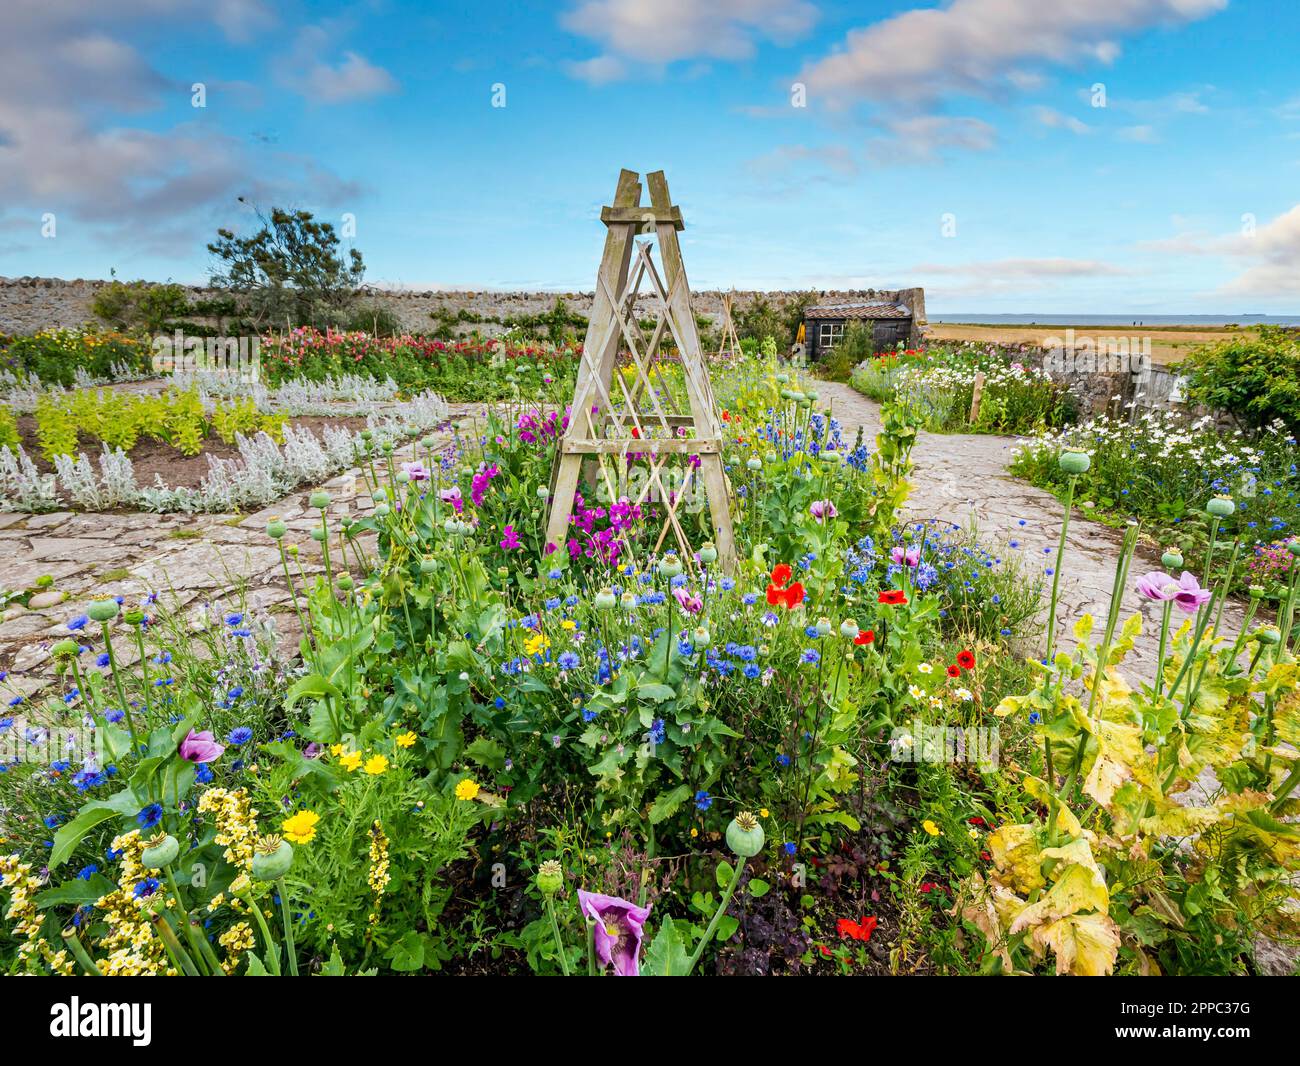 Flowers in Gertrude Jekyll's flower garden with sweet peas, cornflowers, and poppies, Holy Island of Lindisfarne, Northumberland, England, UK Stock Photo